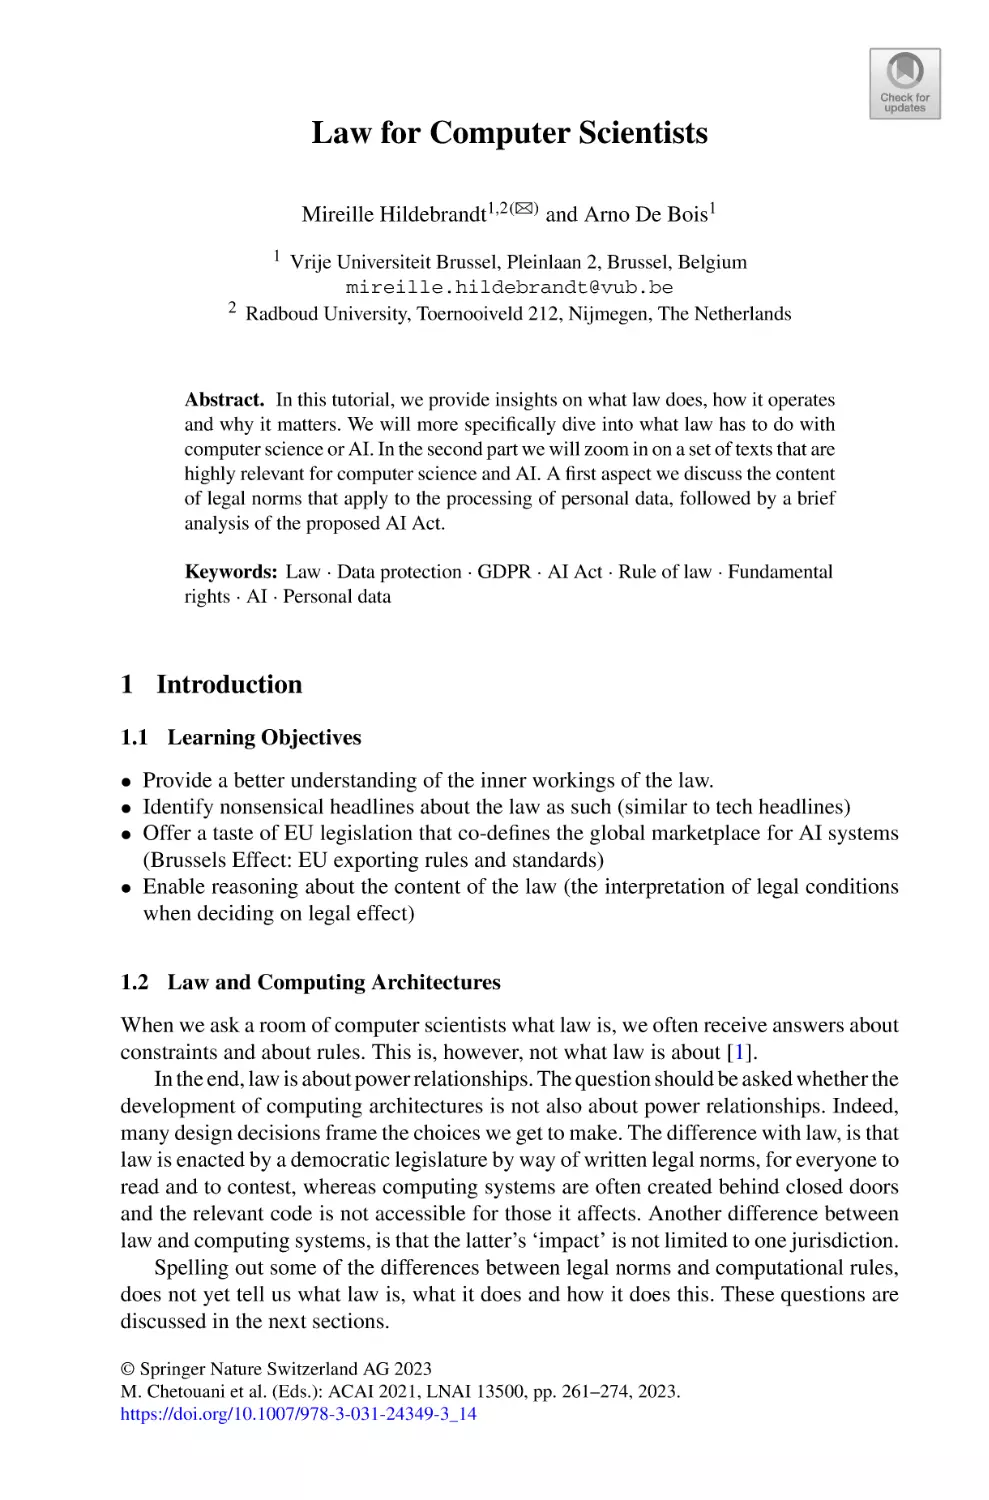 Law for Computer Scientists
1 Introduction
1.1 Learning Objectives
1.2 Law and Computing Architectures